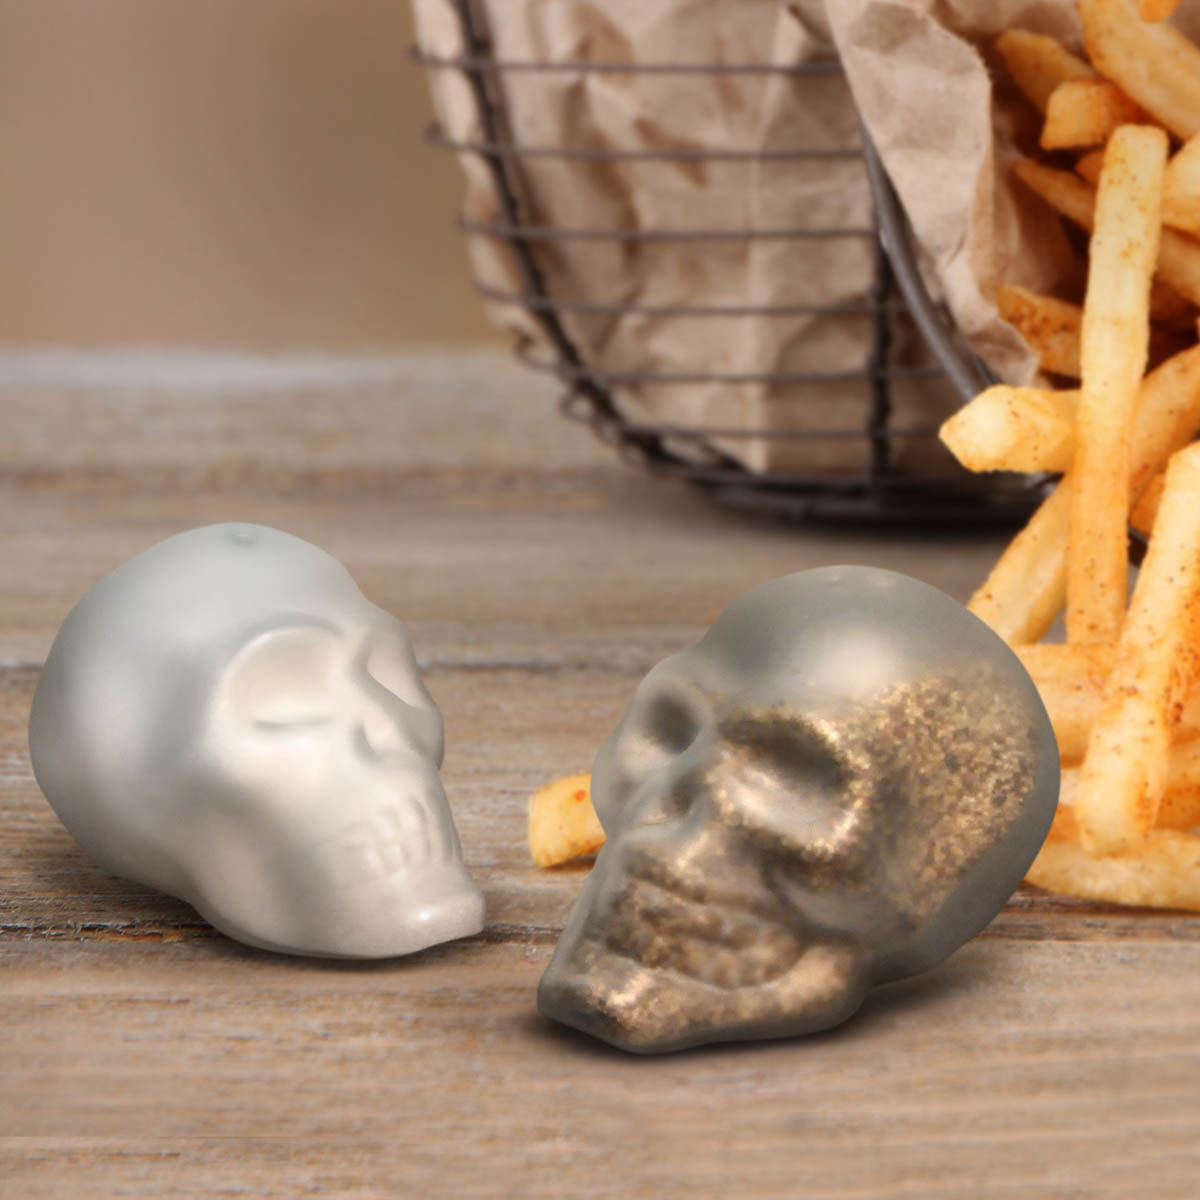 Doomed Skull Salt & Pepper shakers are hand-blown borosilicate glass with a satin finish